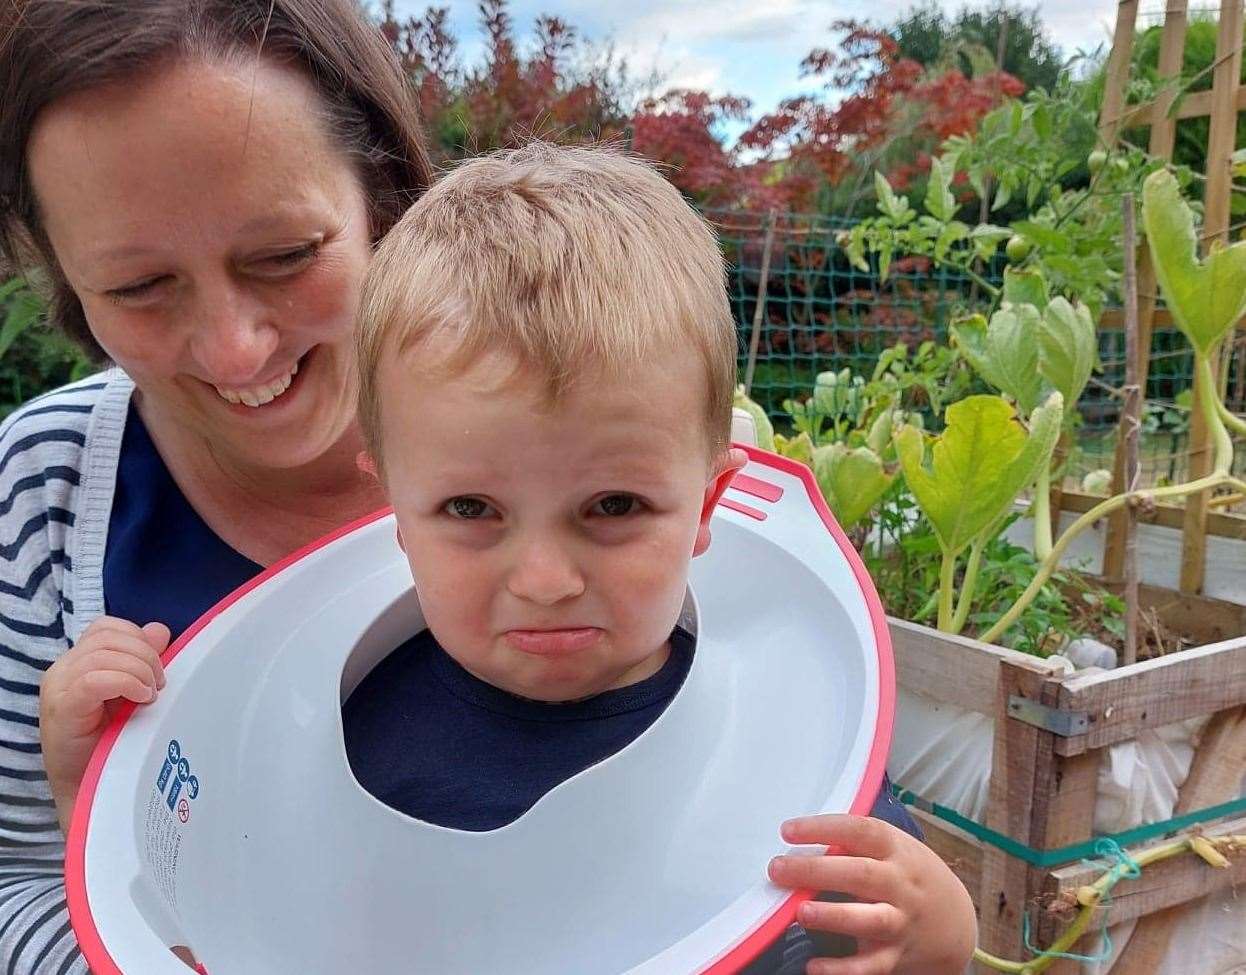 Two-year-old Noah with mum Carla and the toilet seat stuck around his neck